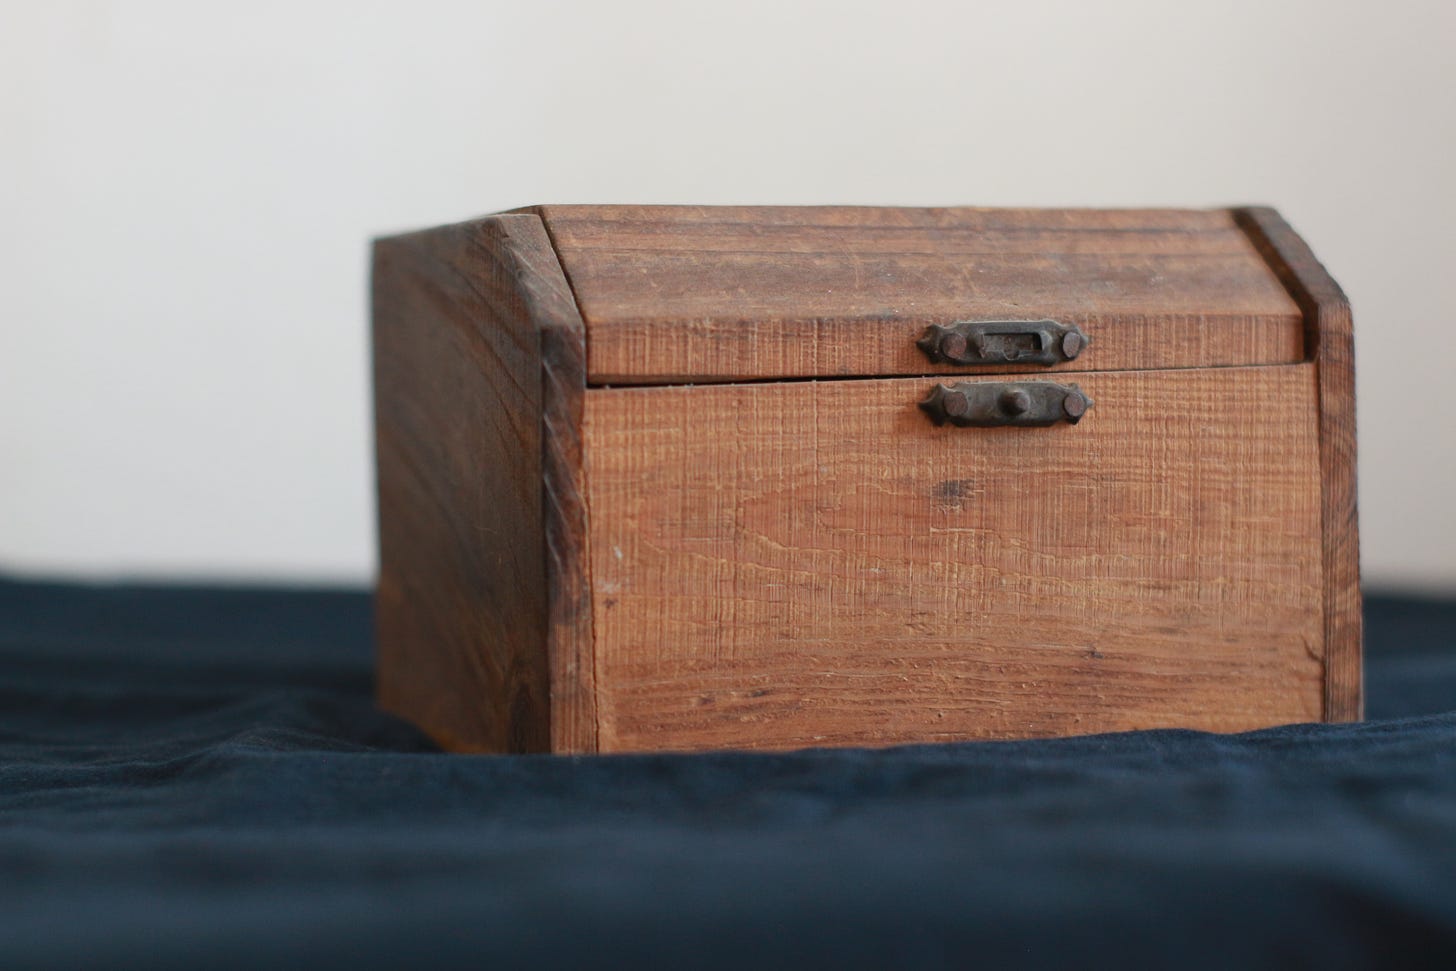 A sturdy-looking wooden box with a catch - the kind you'd keep a secret in.